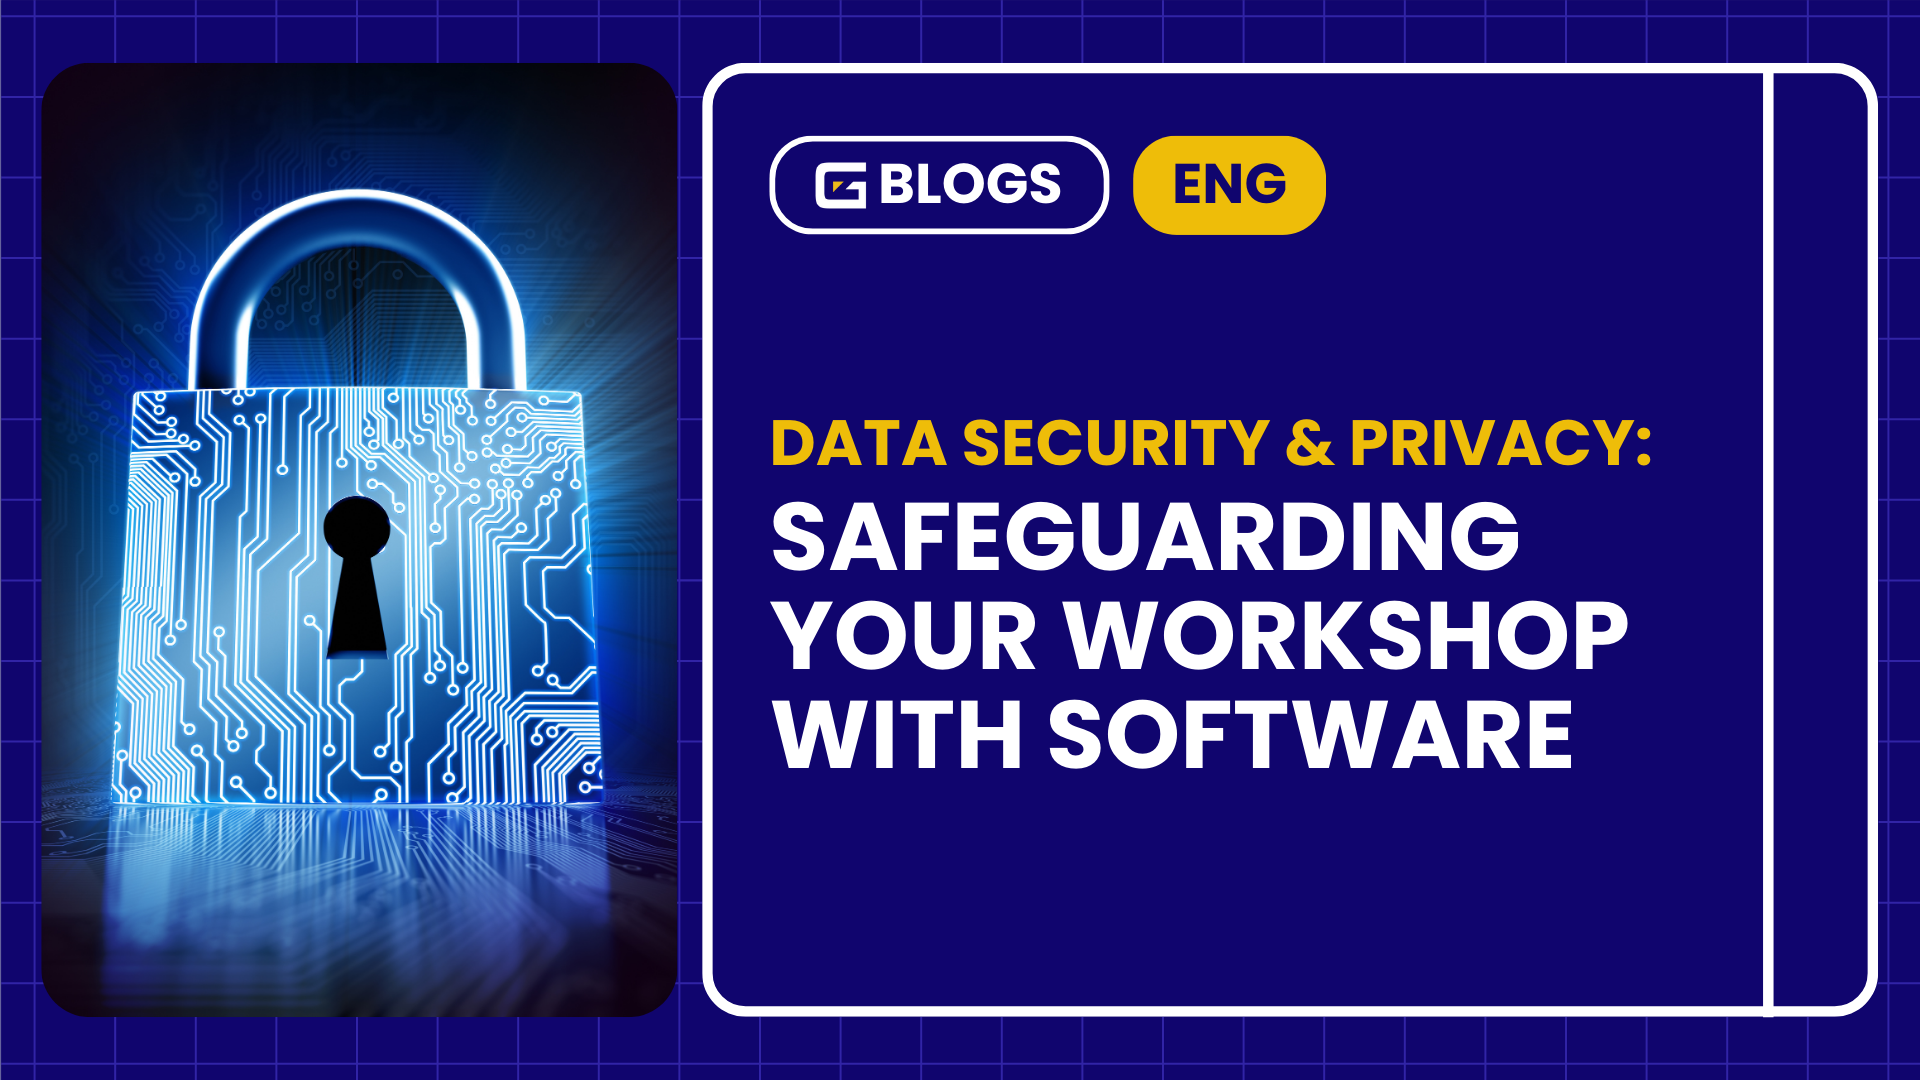 Data Security and Privacy: Safeguarding Your Workshop with Software